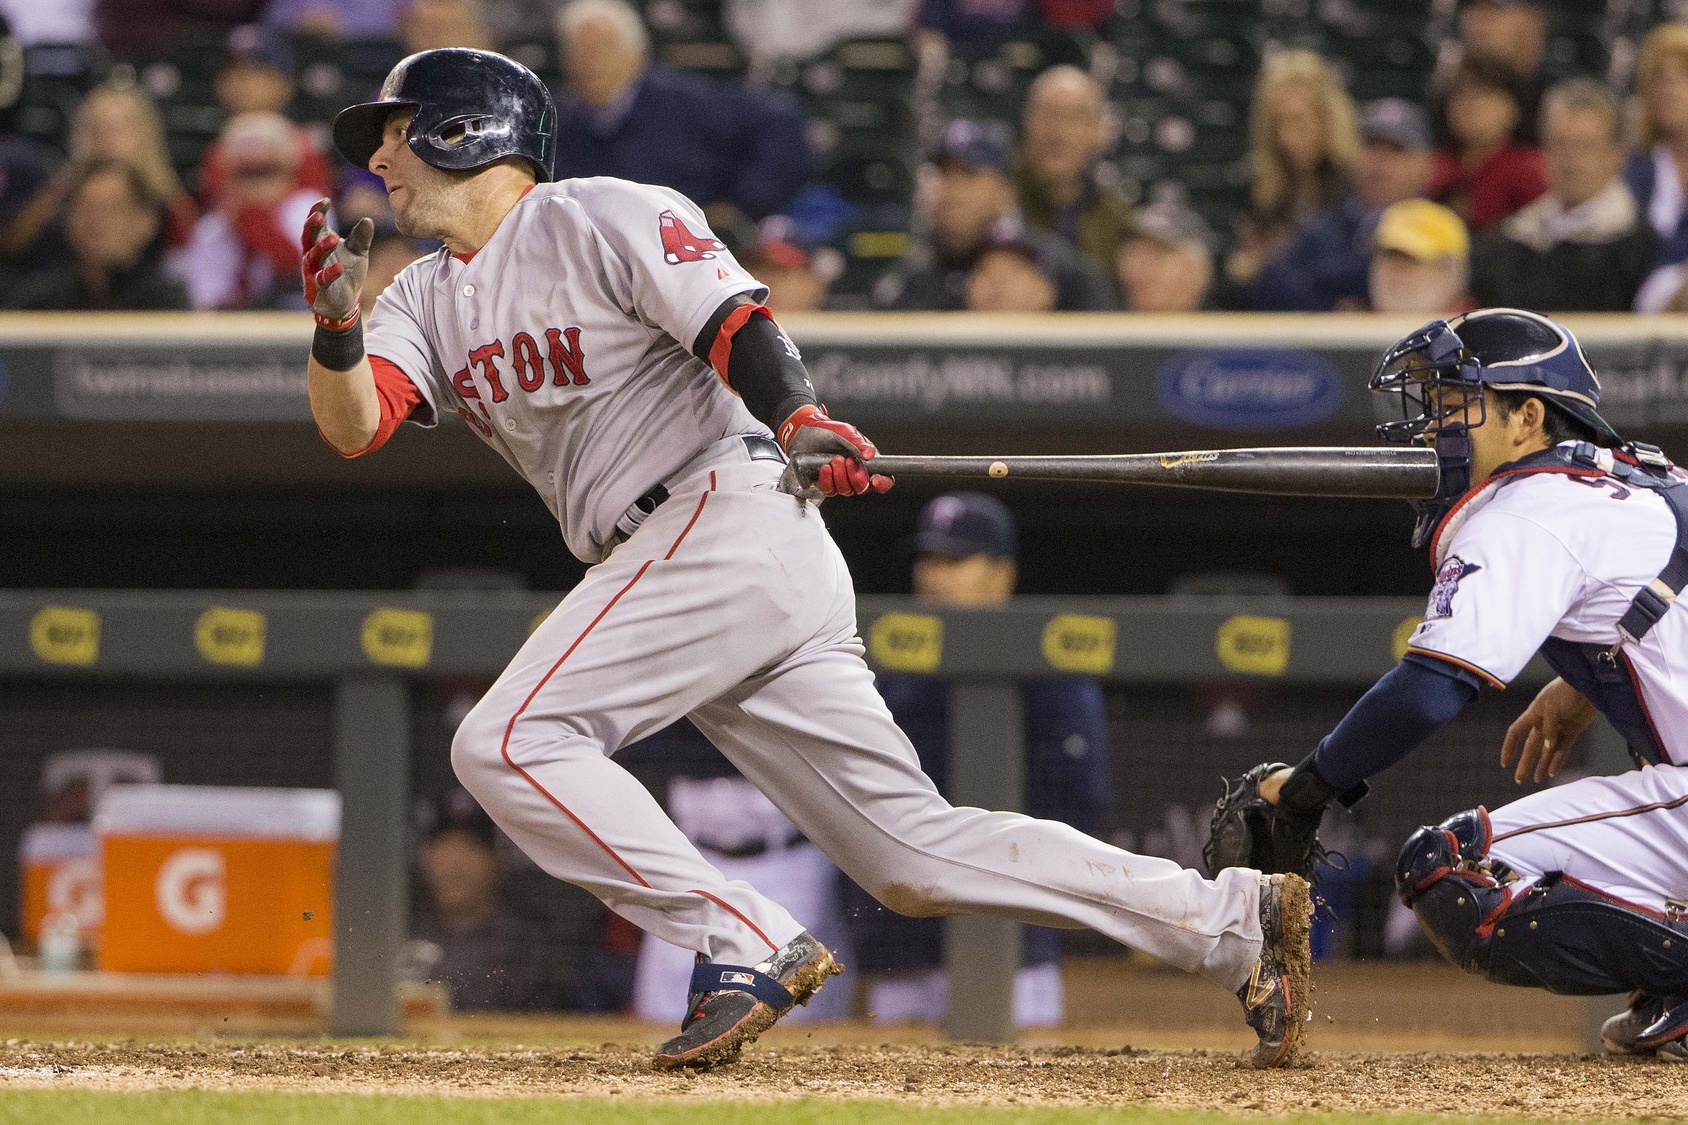 Dustin Pedroia is on a hot streak with an odd-looking bat designed